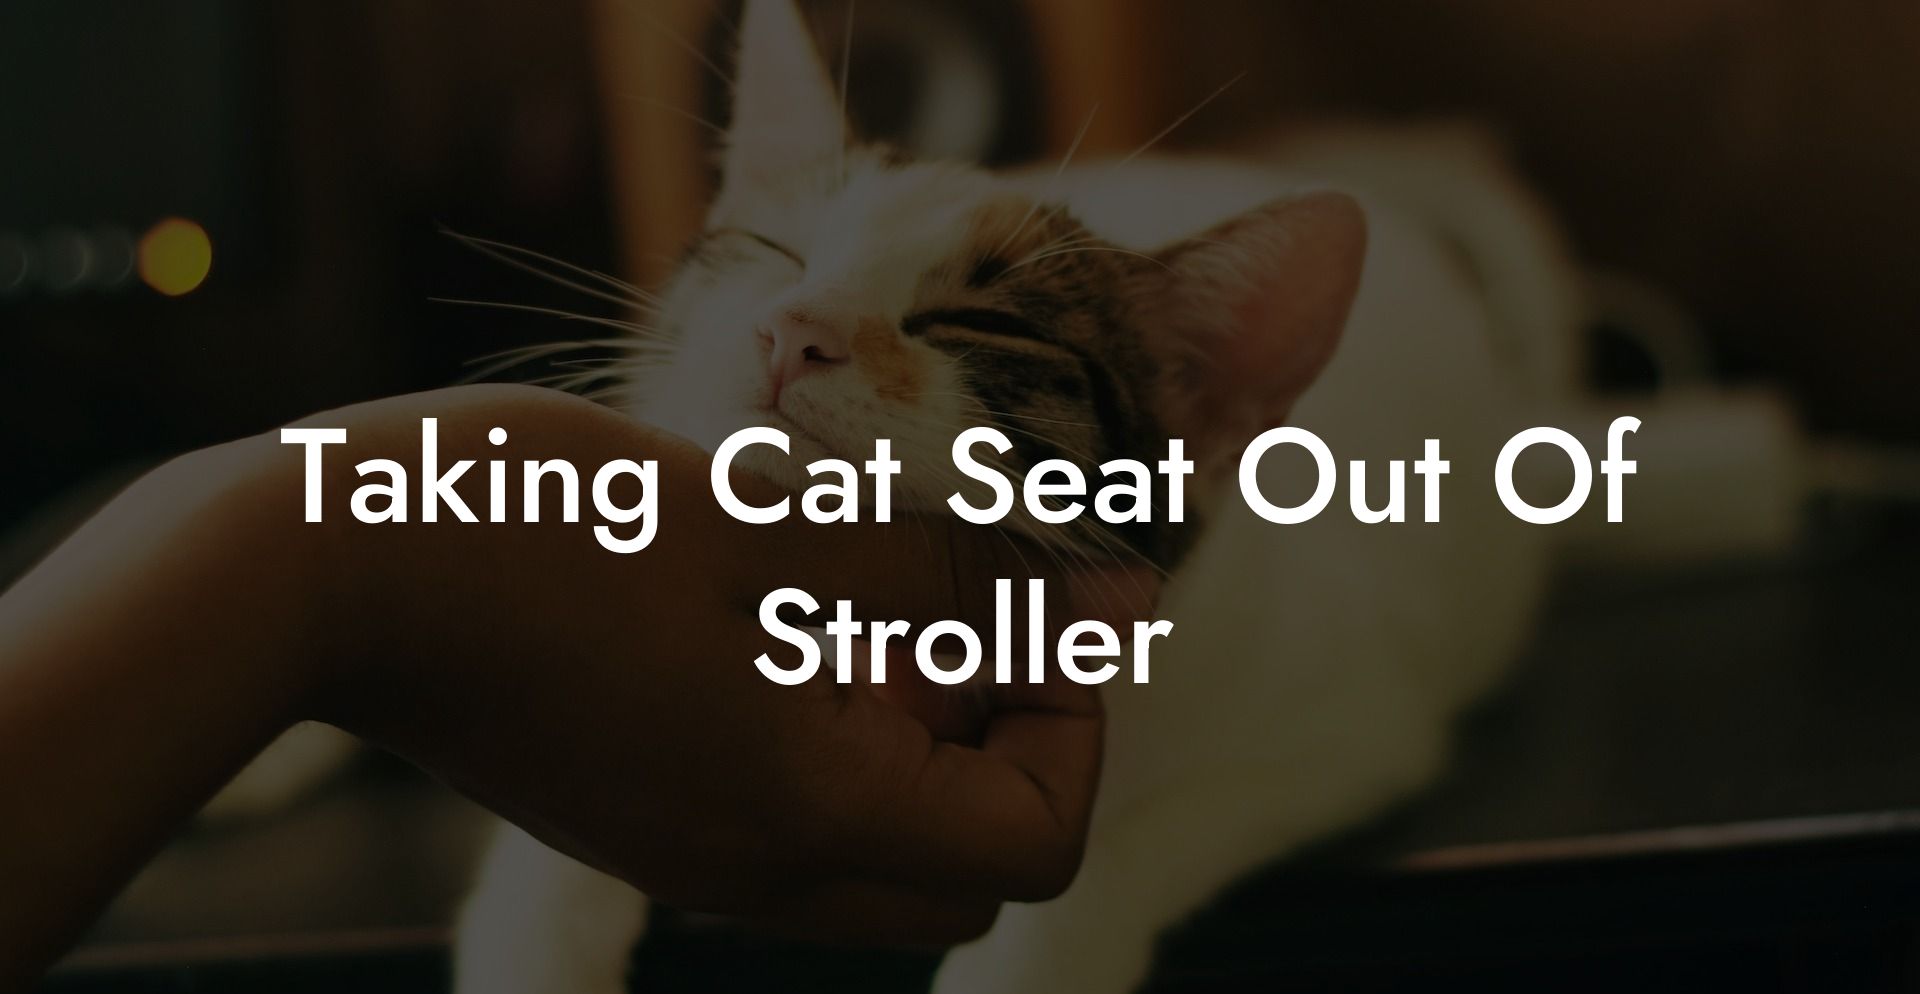 Taking Cat Seat Out Of Stroller